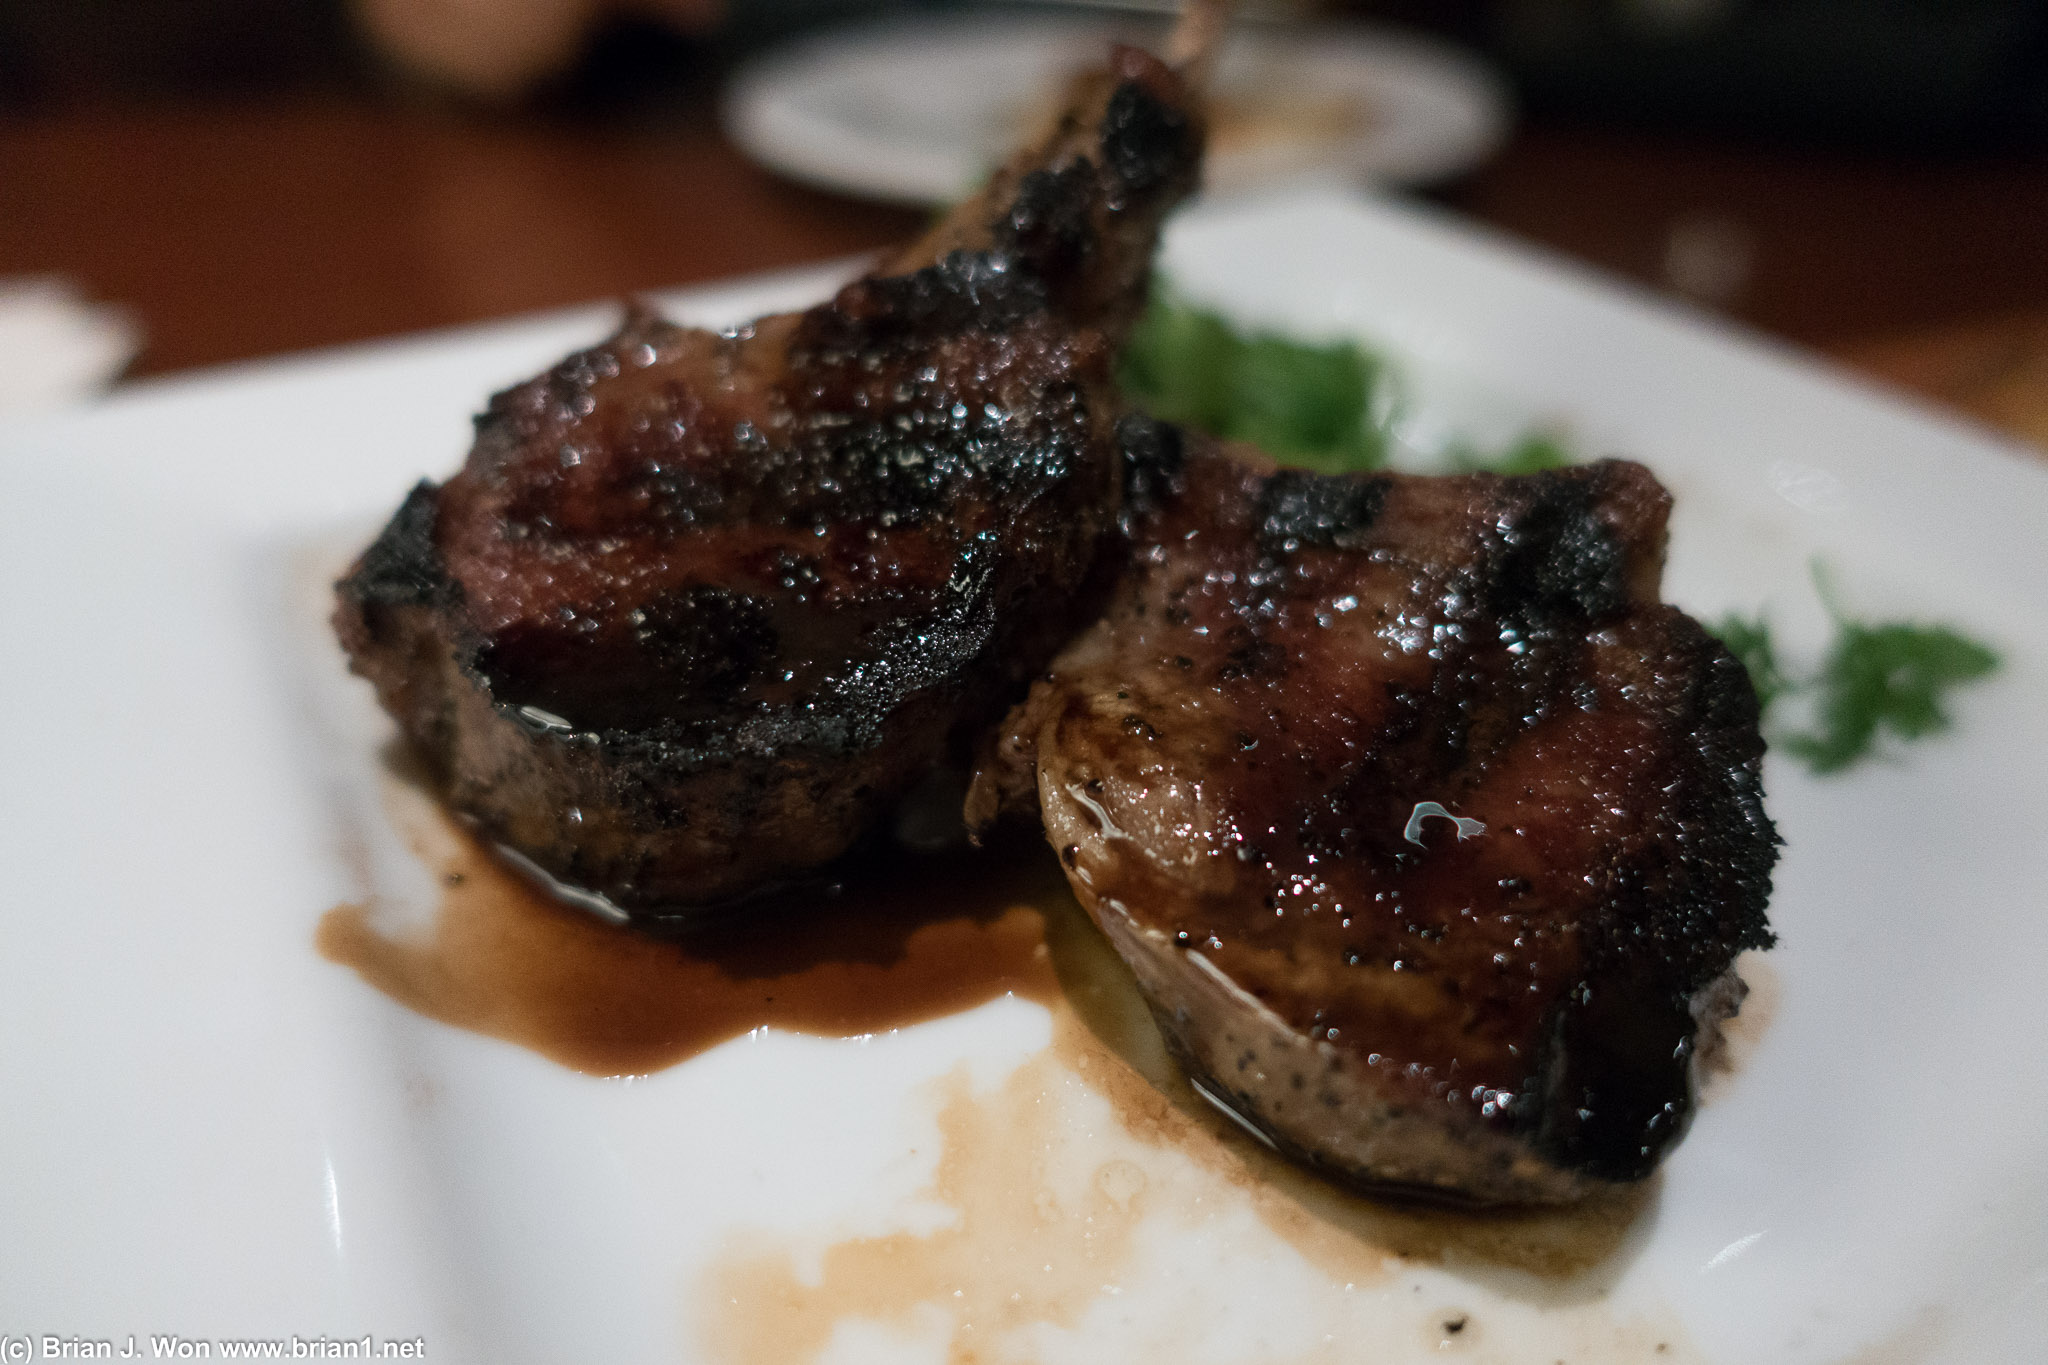 Lamb lollipops. A tad over cooked/too sweet.